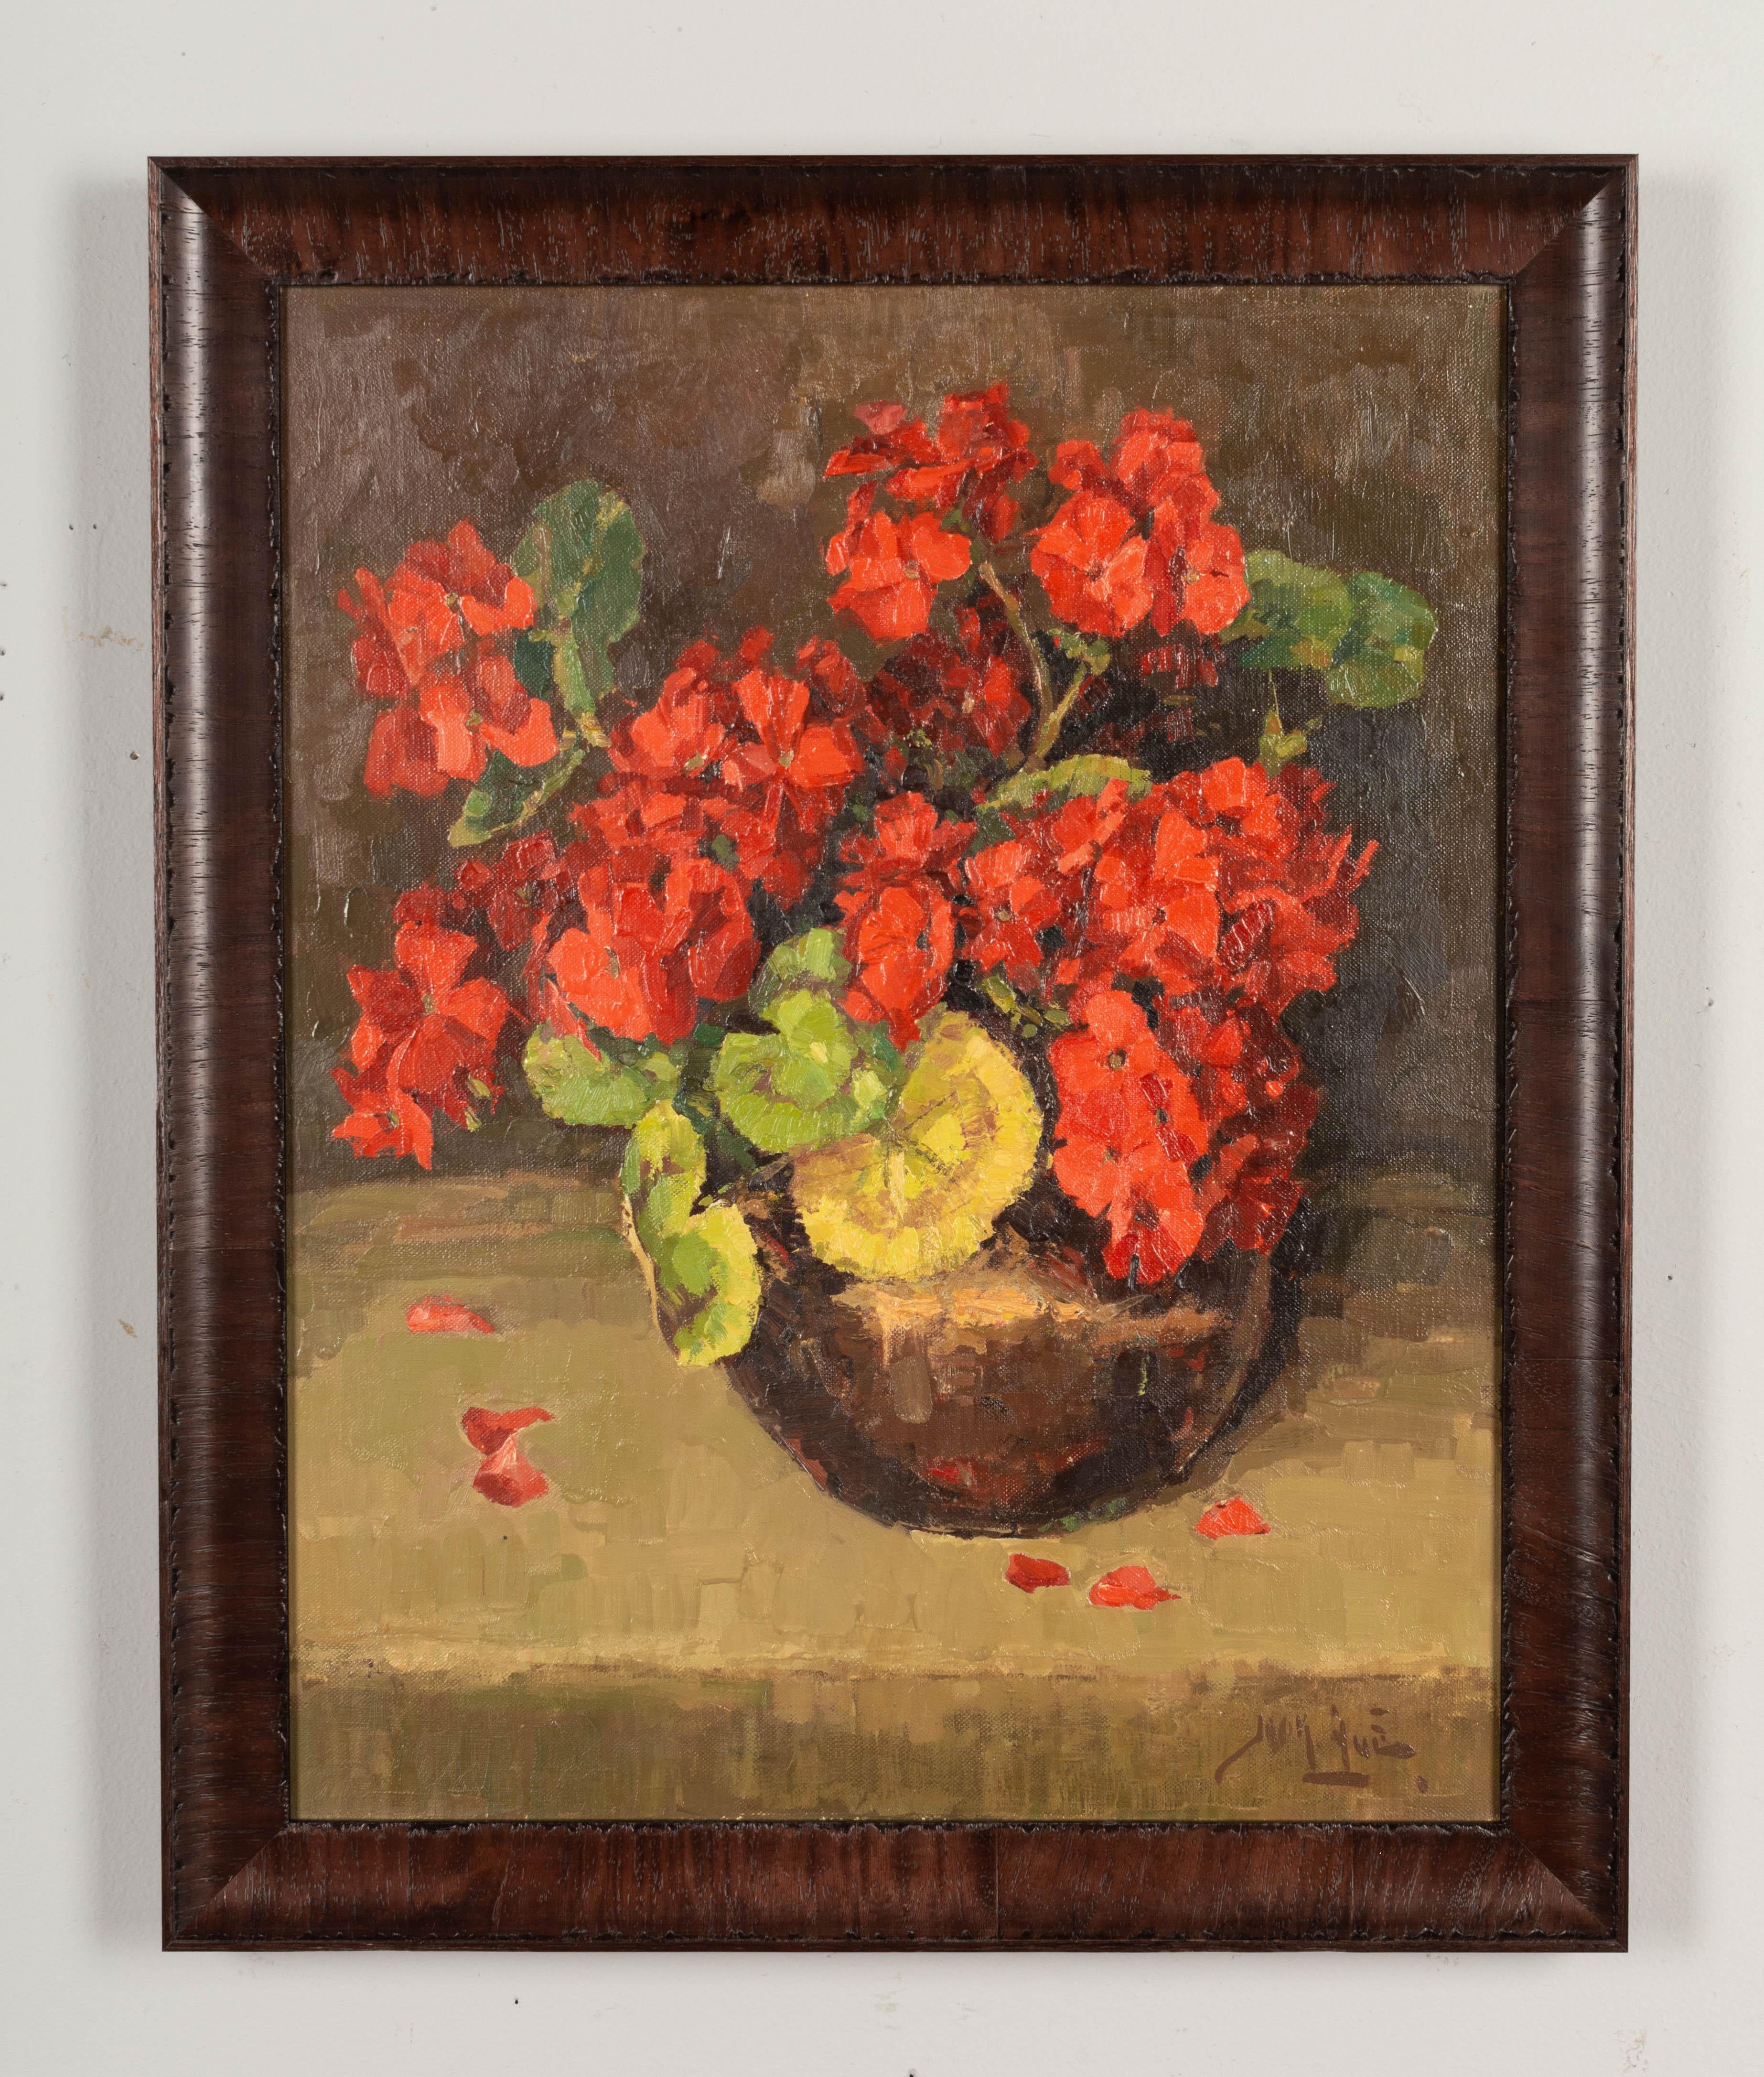 A Dutch still life painting of a pot of geraniums. Beautiful vibrant color. Oil on canvas. Illegible signature lower right. New frame.